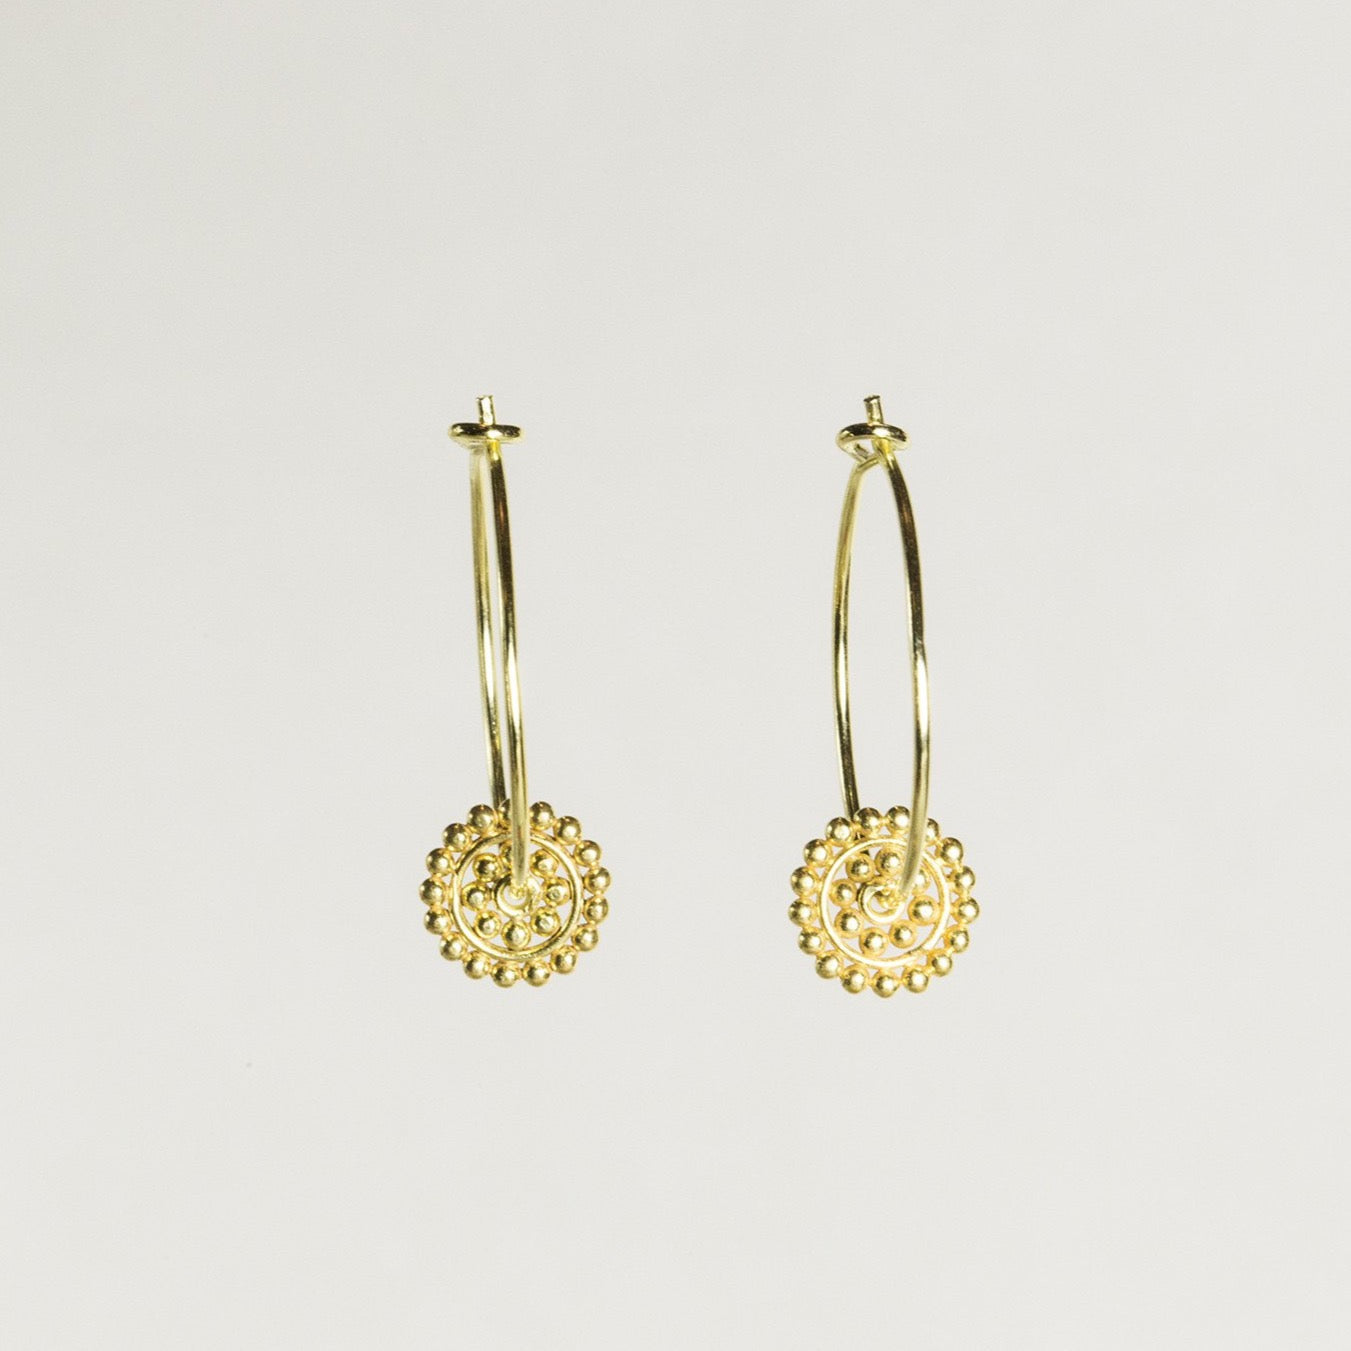 a copy of Roman antique earrings, theses dotted circles are a fantastic addition to a simple hoop